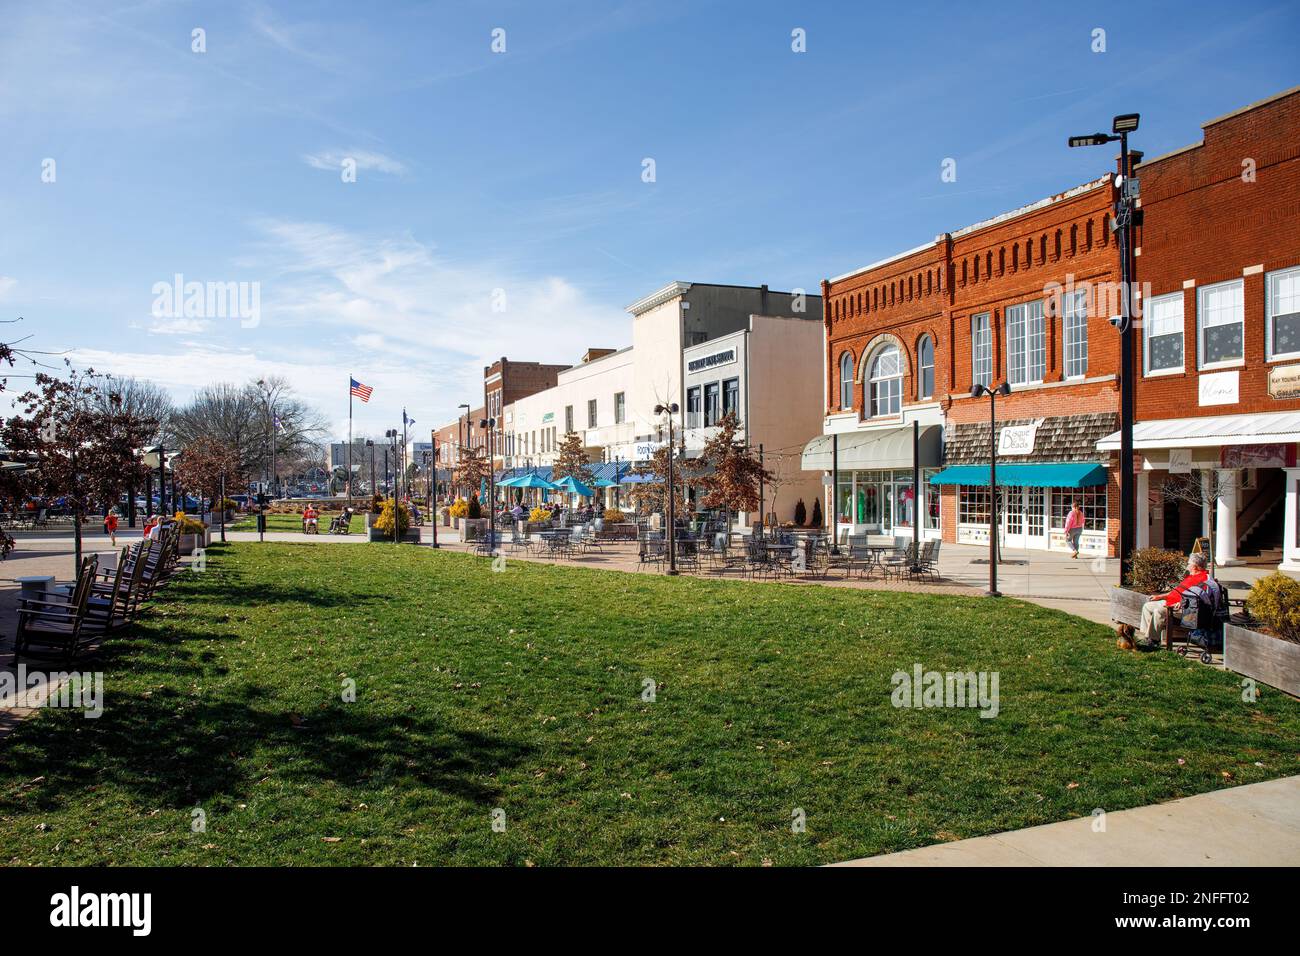 HICKORY, NC, USA-14 FEB 2023: Downtown plaza with outdoor dining, shoppers, green space, storefronts, on sunny winter day. Stock Photo